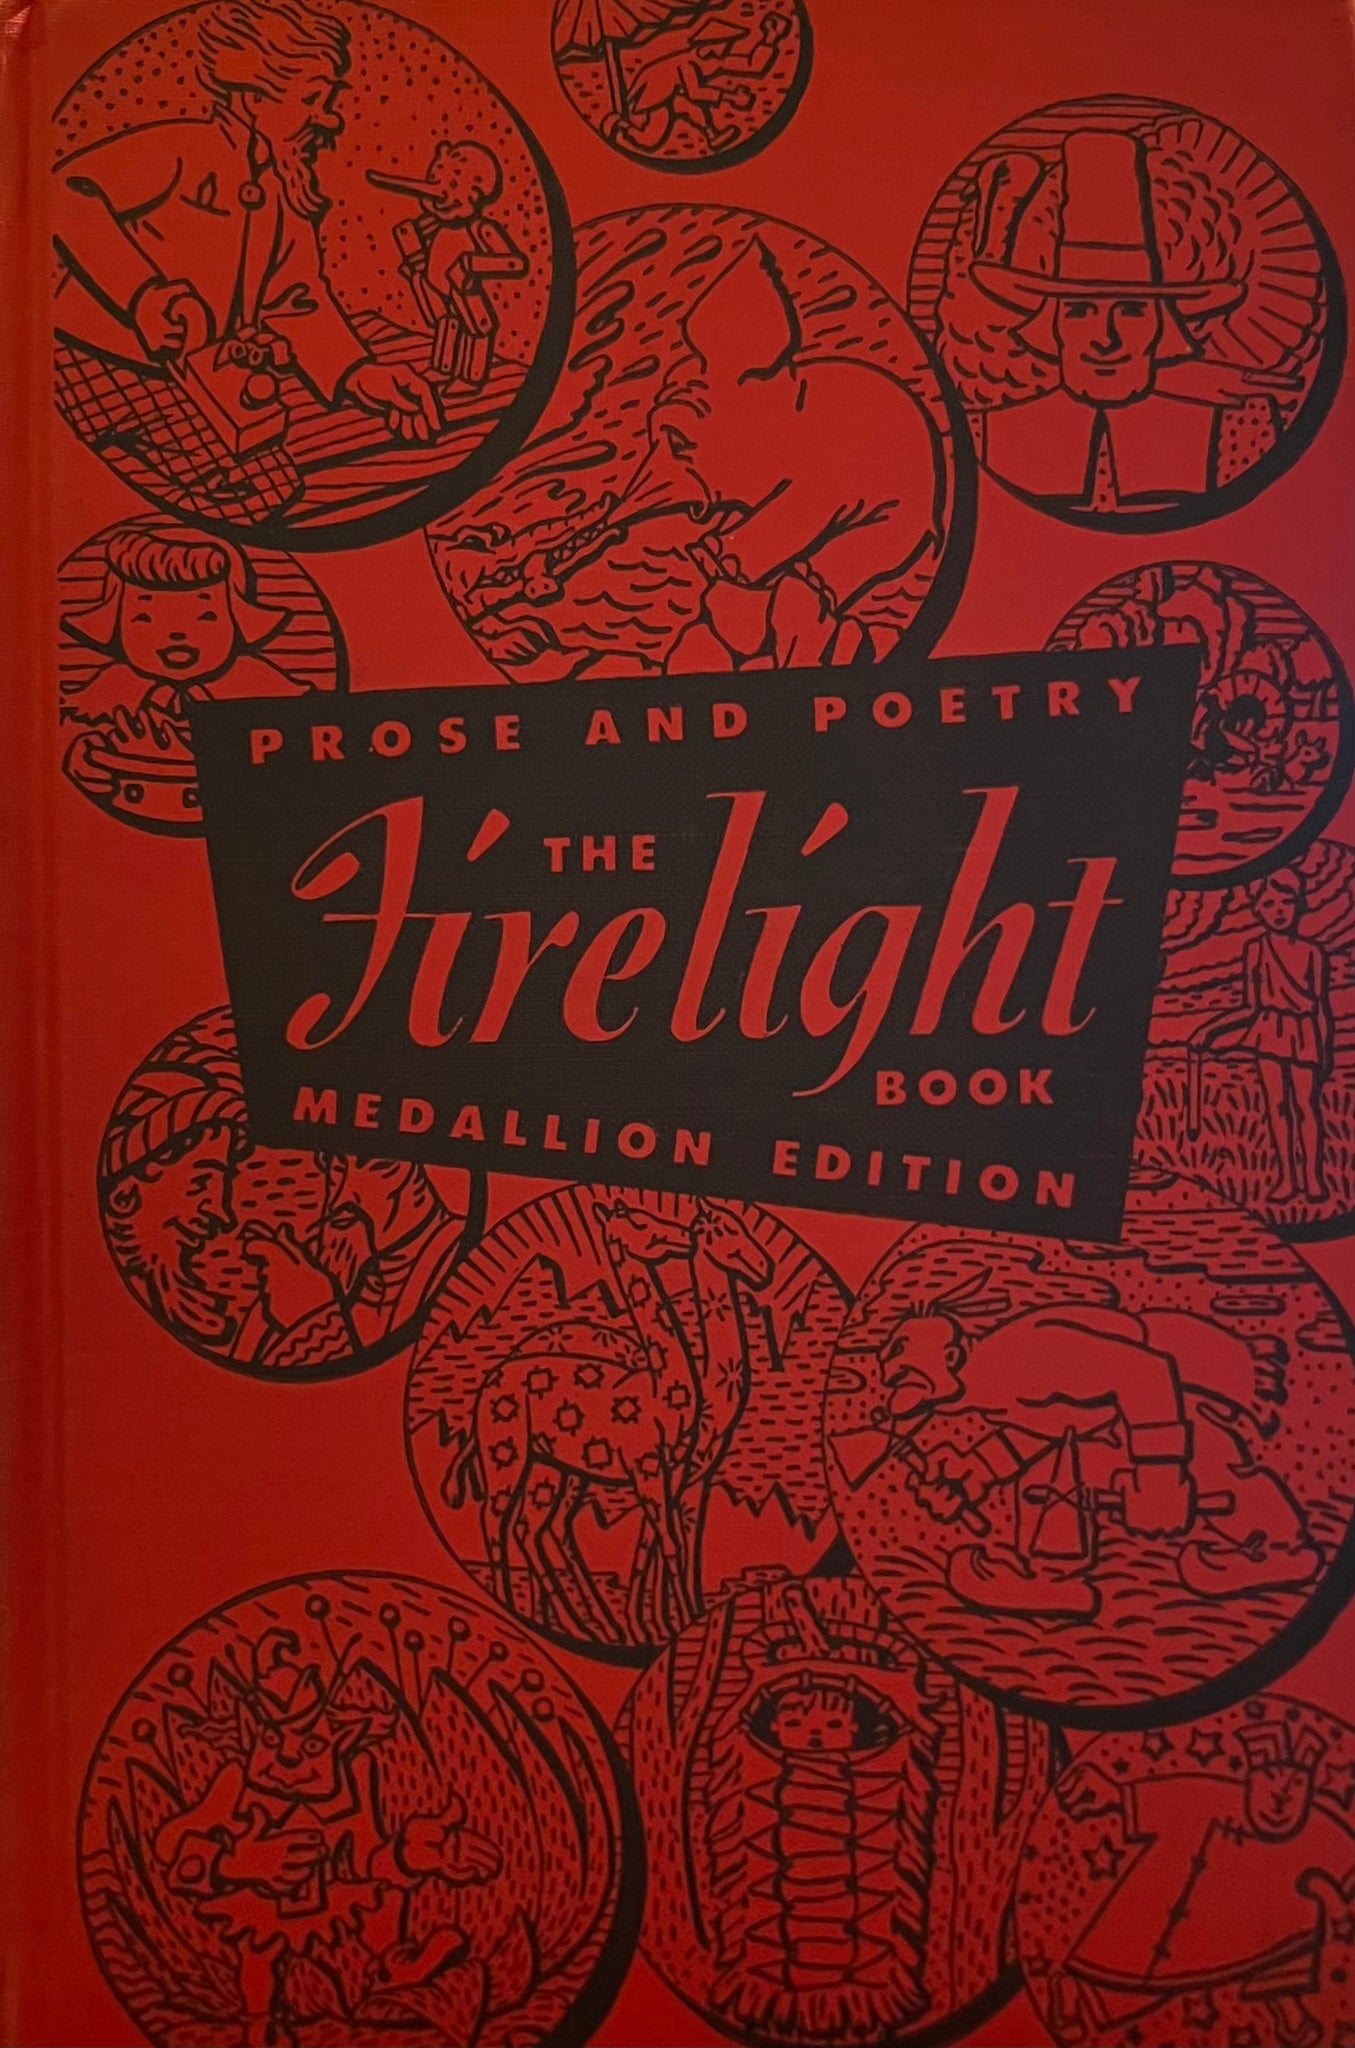 The Firelight Book (Medallion Edition, Prose and Poetry), Barbara Henderson, Marion T. Garretson, Frederick H. Weber